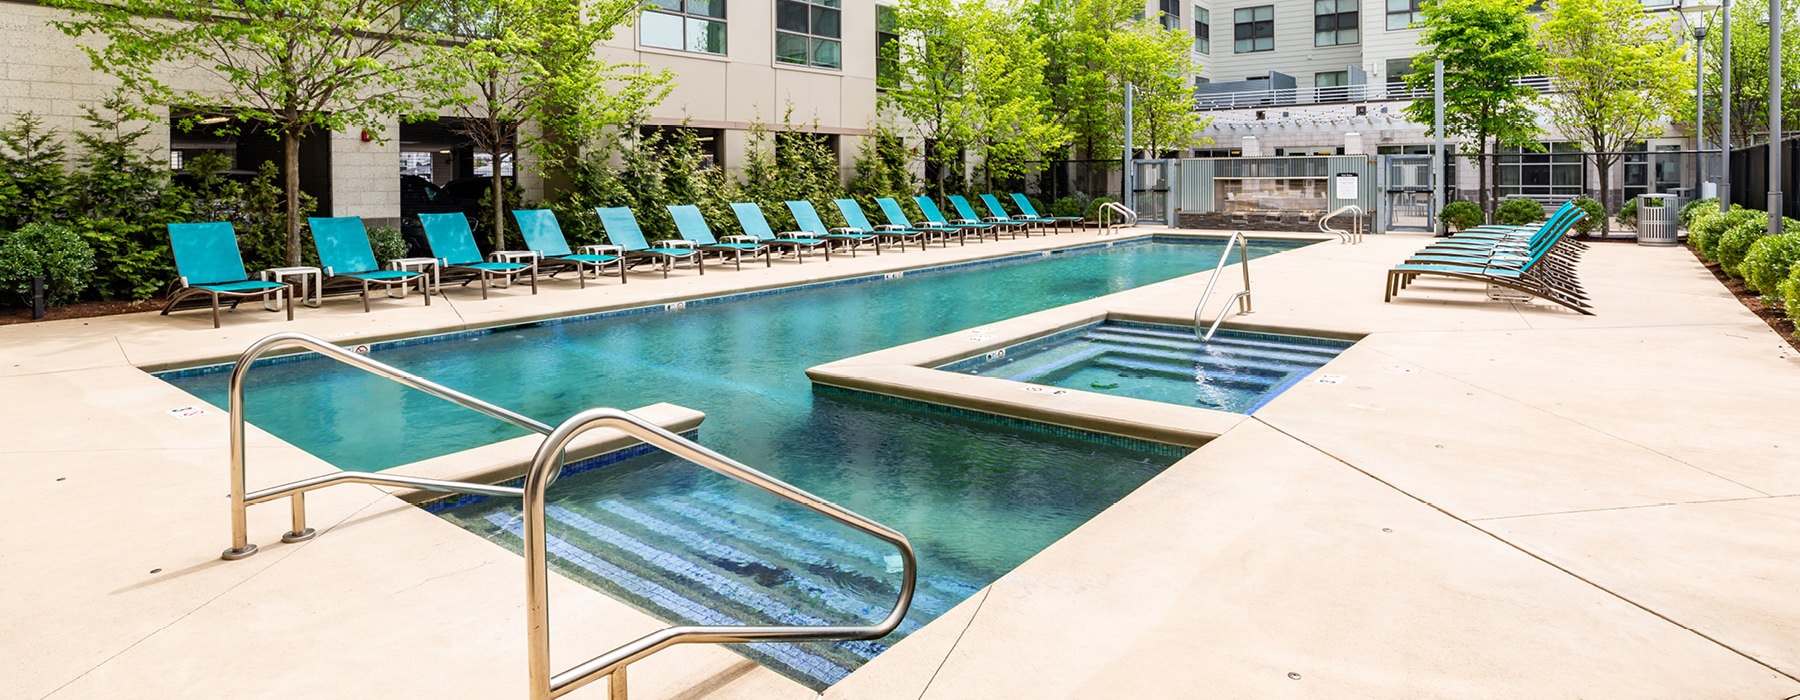 lounge chairs flank outdoor swimming pool